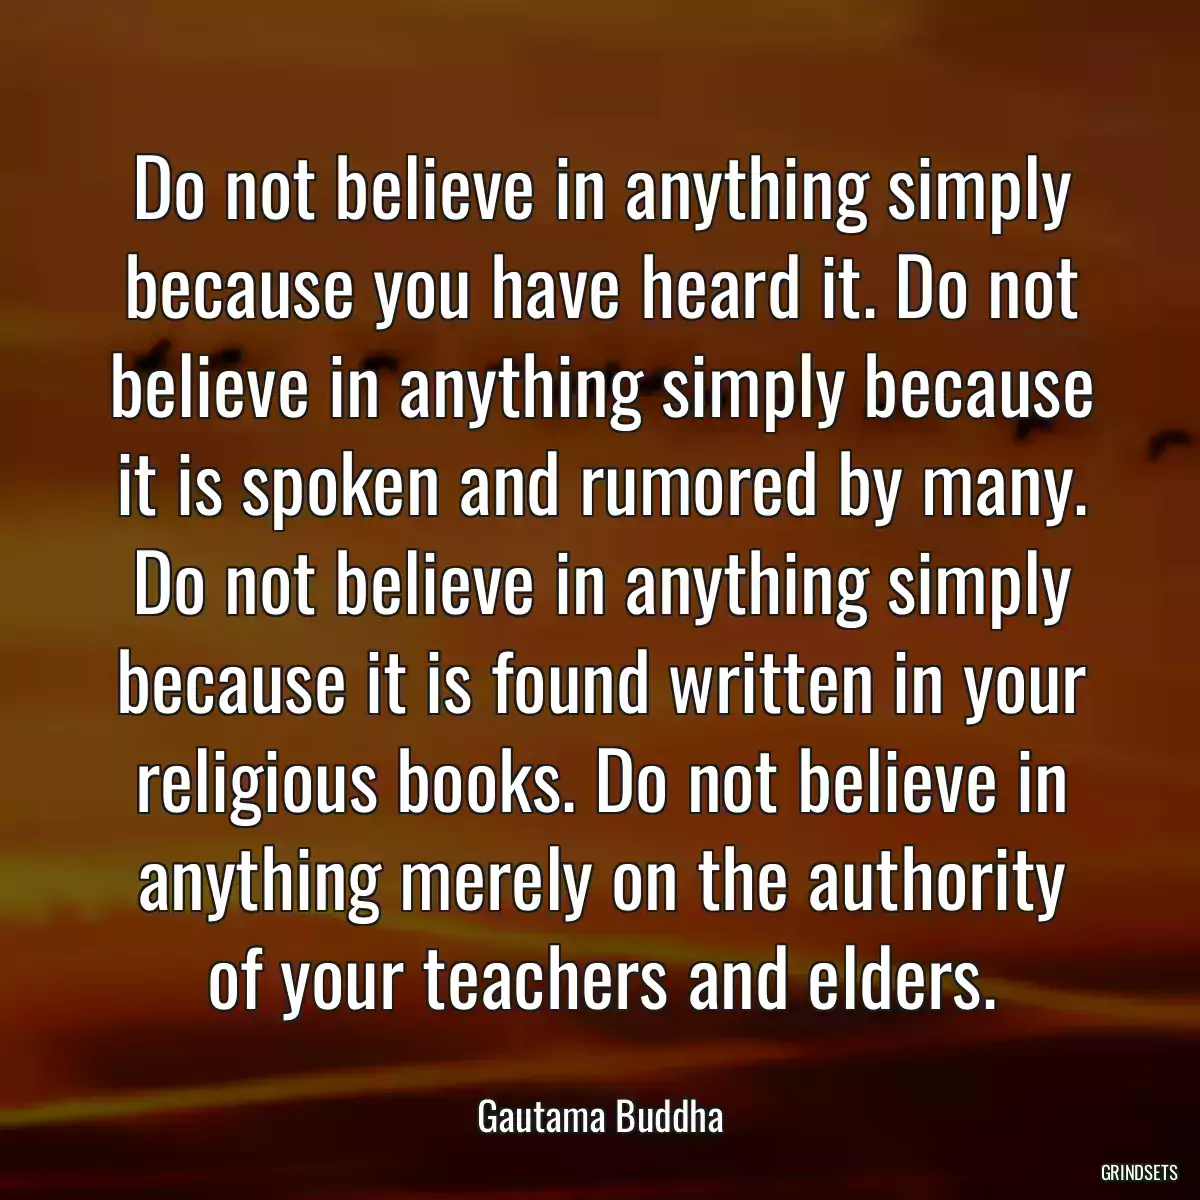 Do not believe in anything simply because you have heard it. Do not believe in anything simply because it is spoken and rumored by many. Do not believe in anything simply because it is found written in your religious books. Do not believe in anything merely on the authority of your teachers and elders.